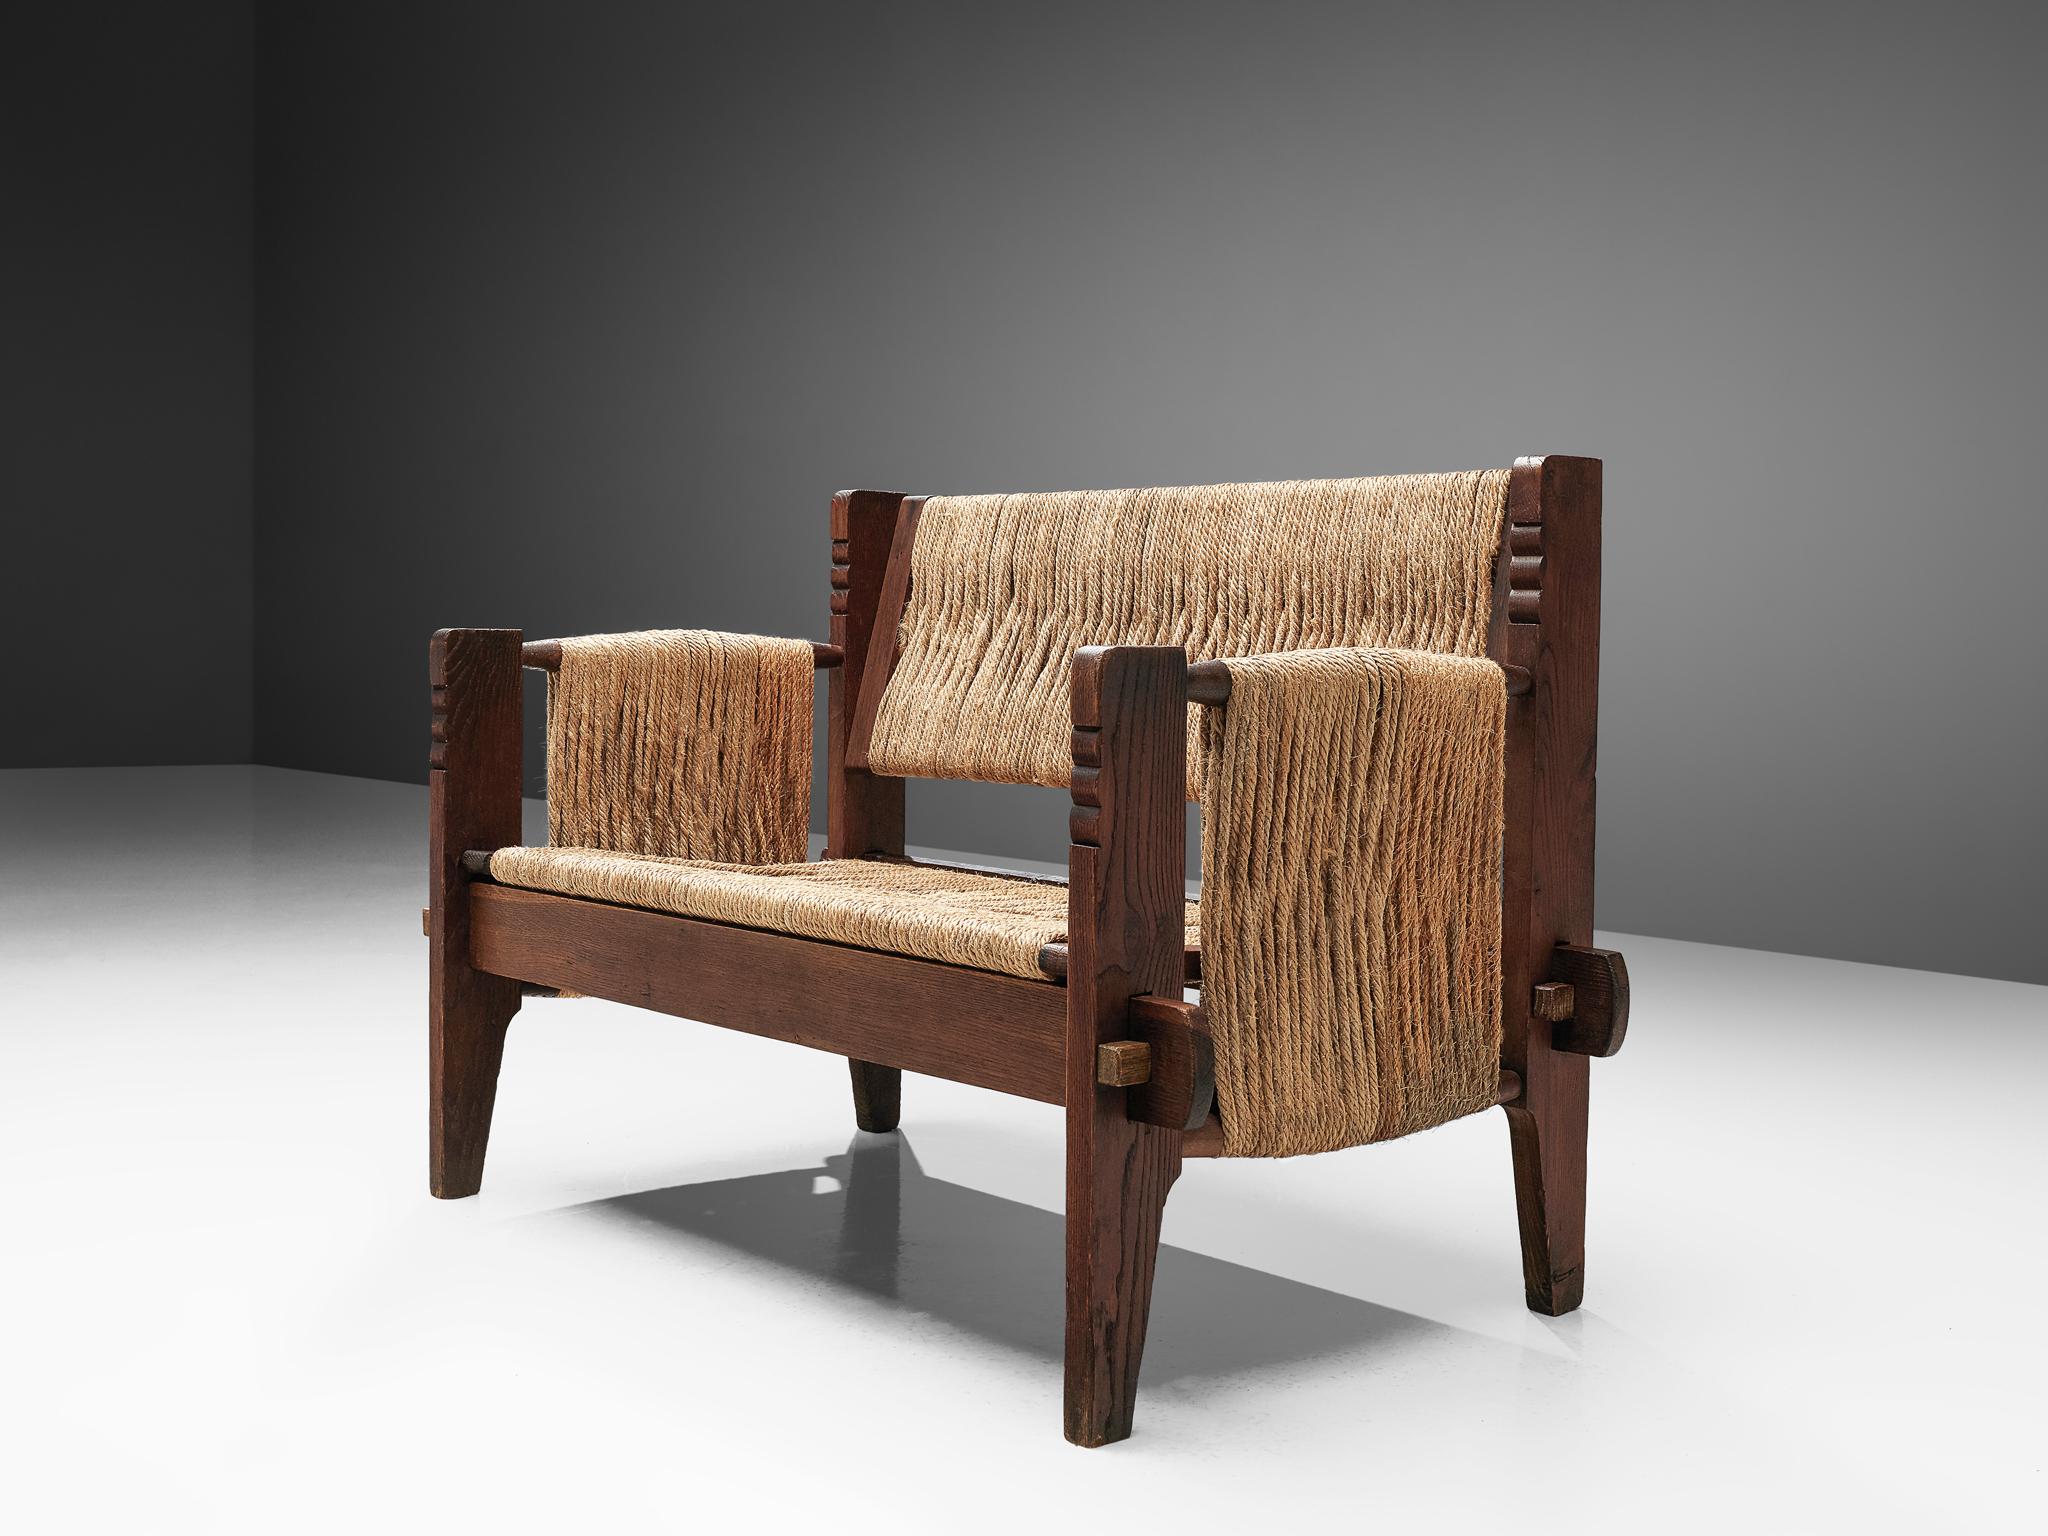 Bench, oak and rope, Mexico, 1950s

This robust Mexican settee originates from the 1950s. The frame is made of stained oak with decorative carved elements. The seat and legs are attached by wooden wedges. The seat, back and armrests are made of